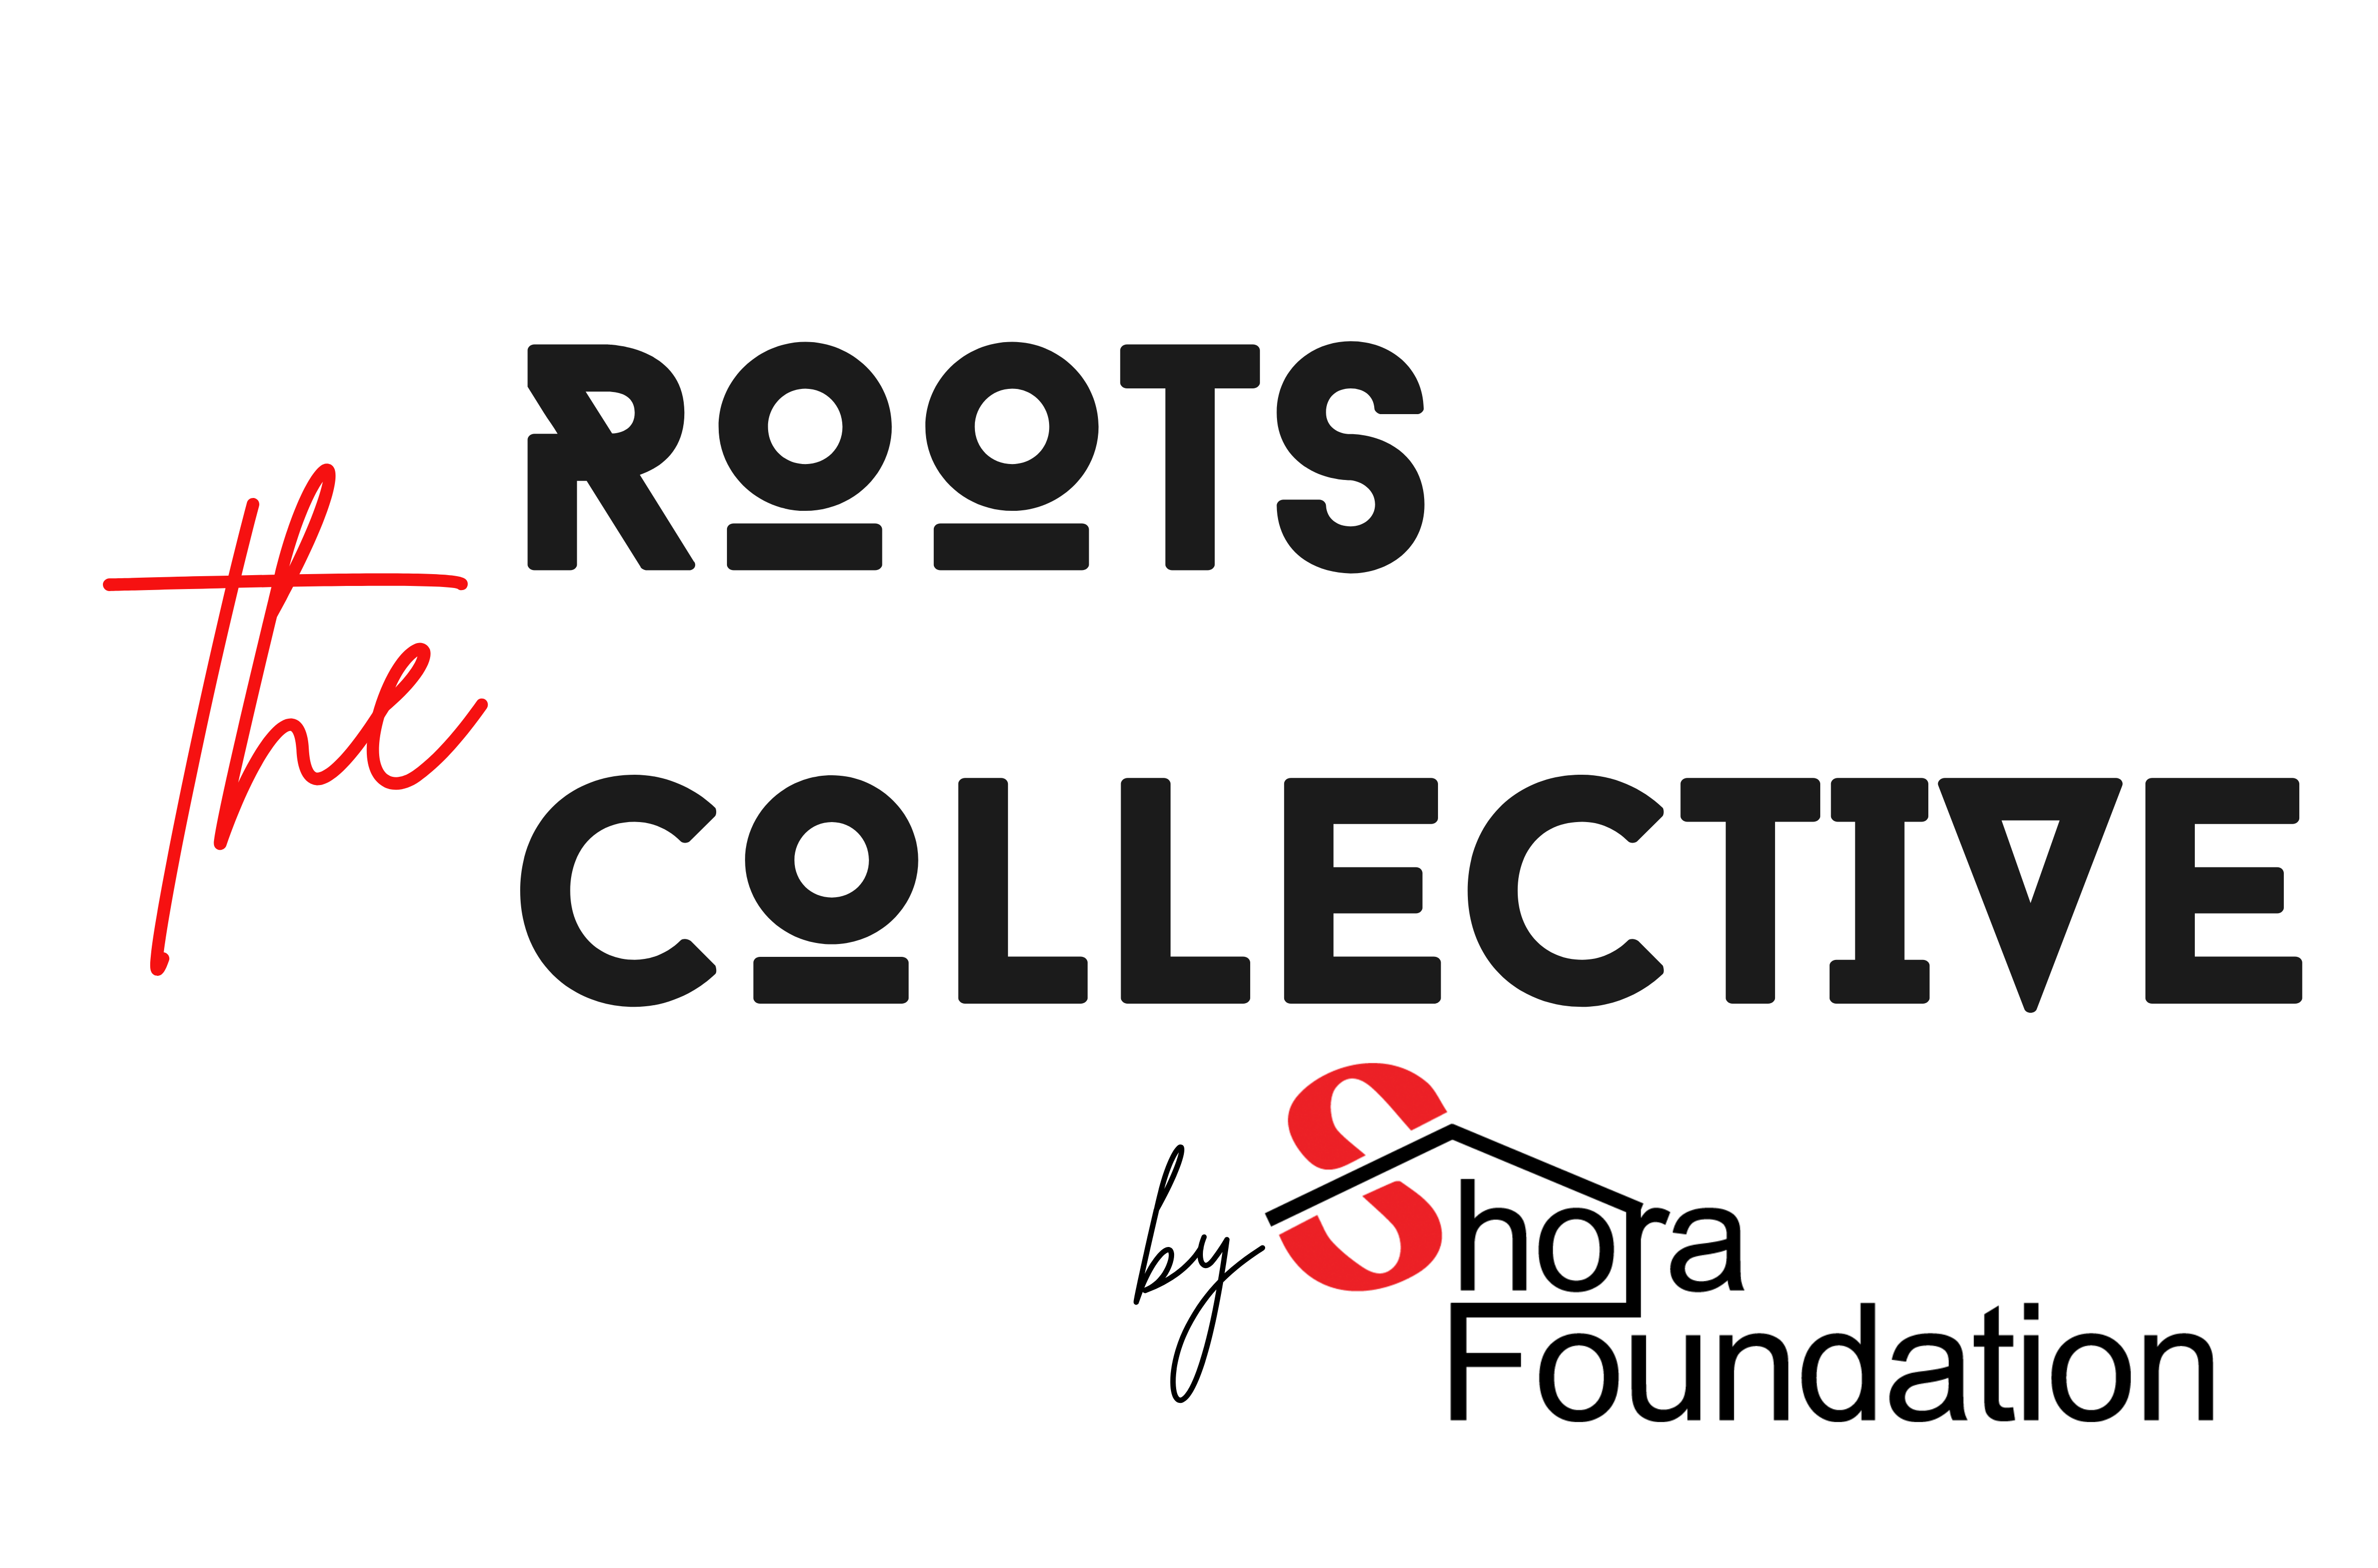 The Roots Collective Logo 1